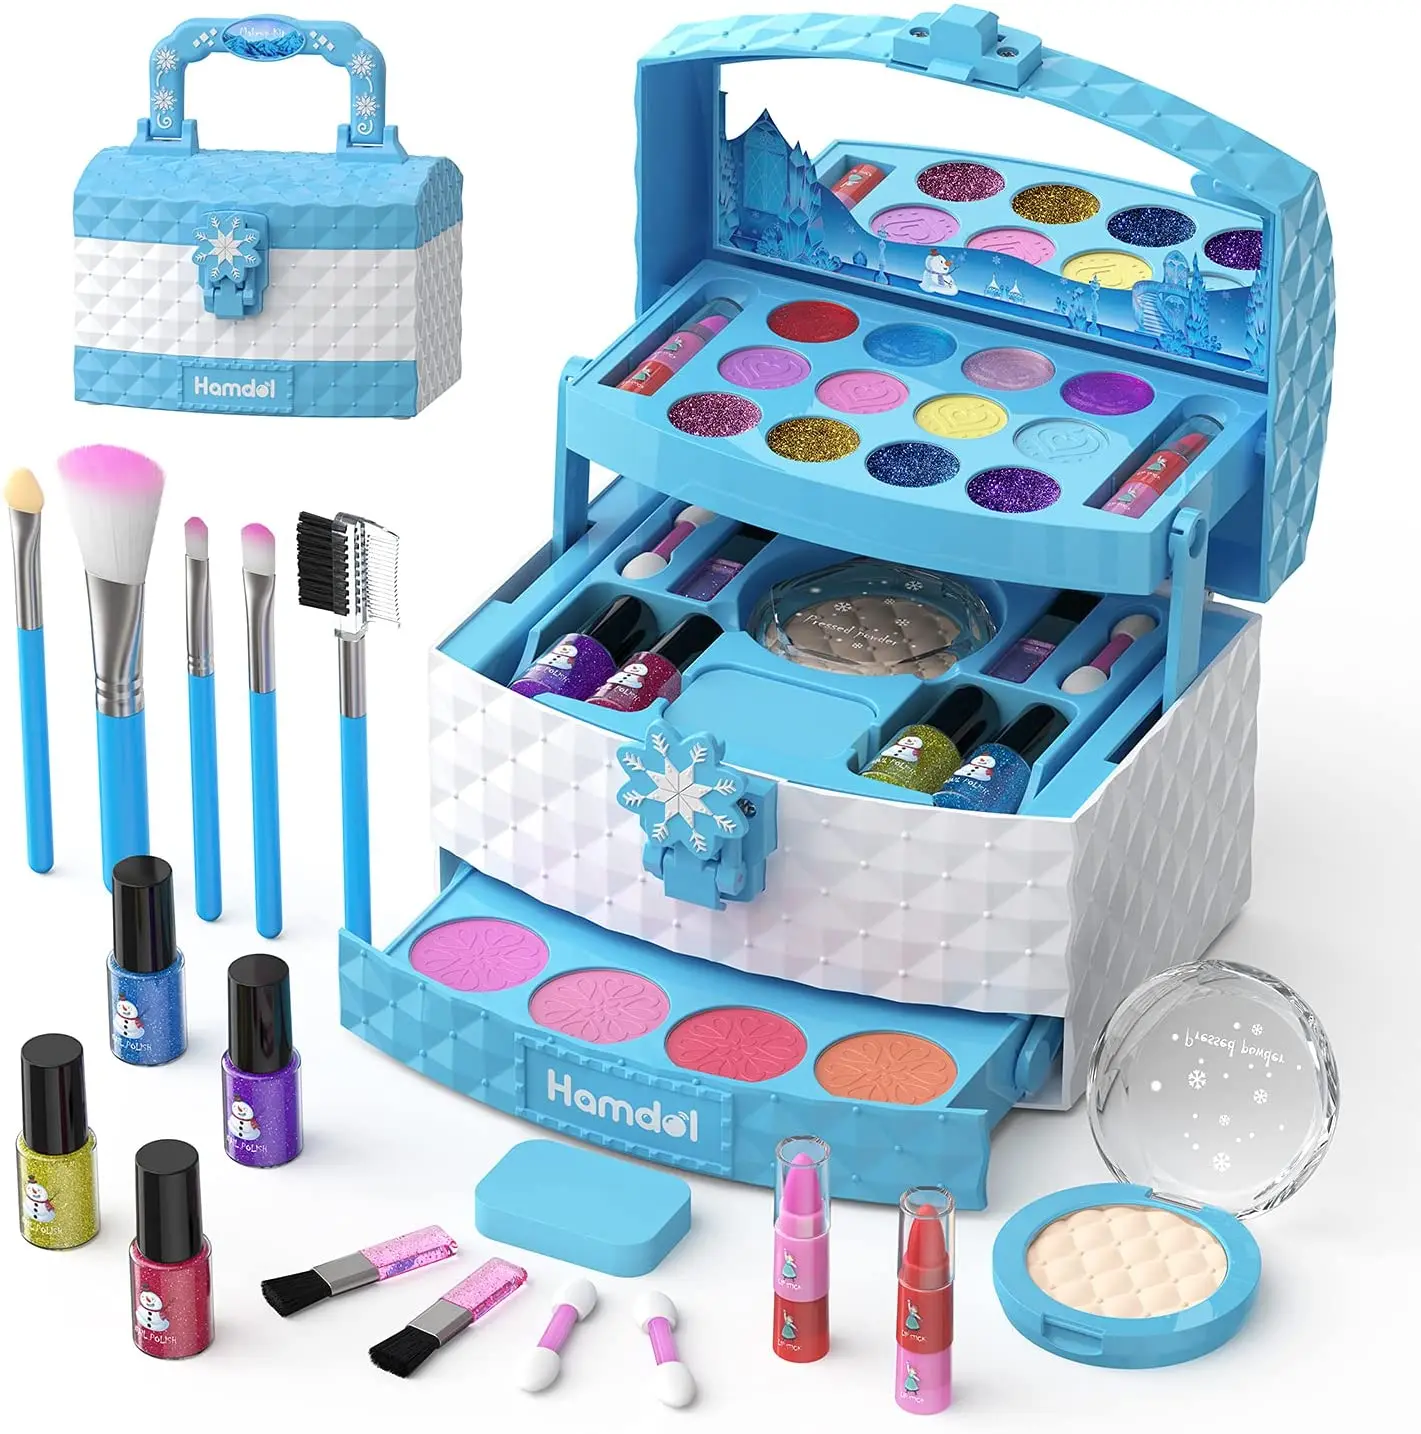 Source OEM Girls Pretend Play Makeup Sets Make Up Kits with Cosmetic Bag Children's Play Toy for Toddler Girl Gifts on m.alibaba.com